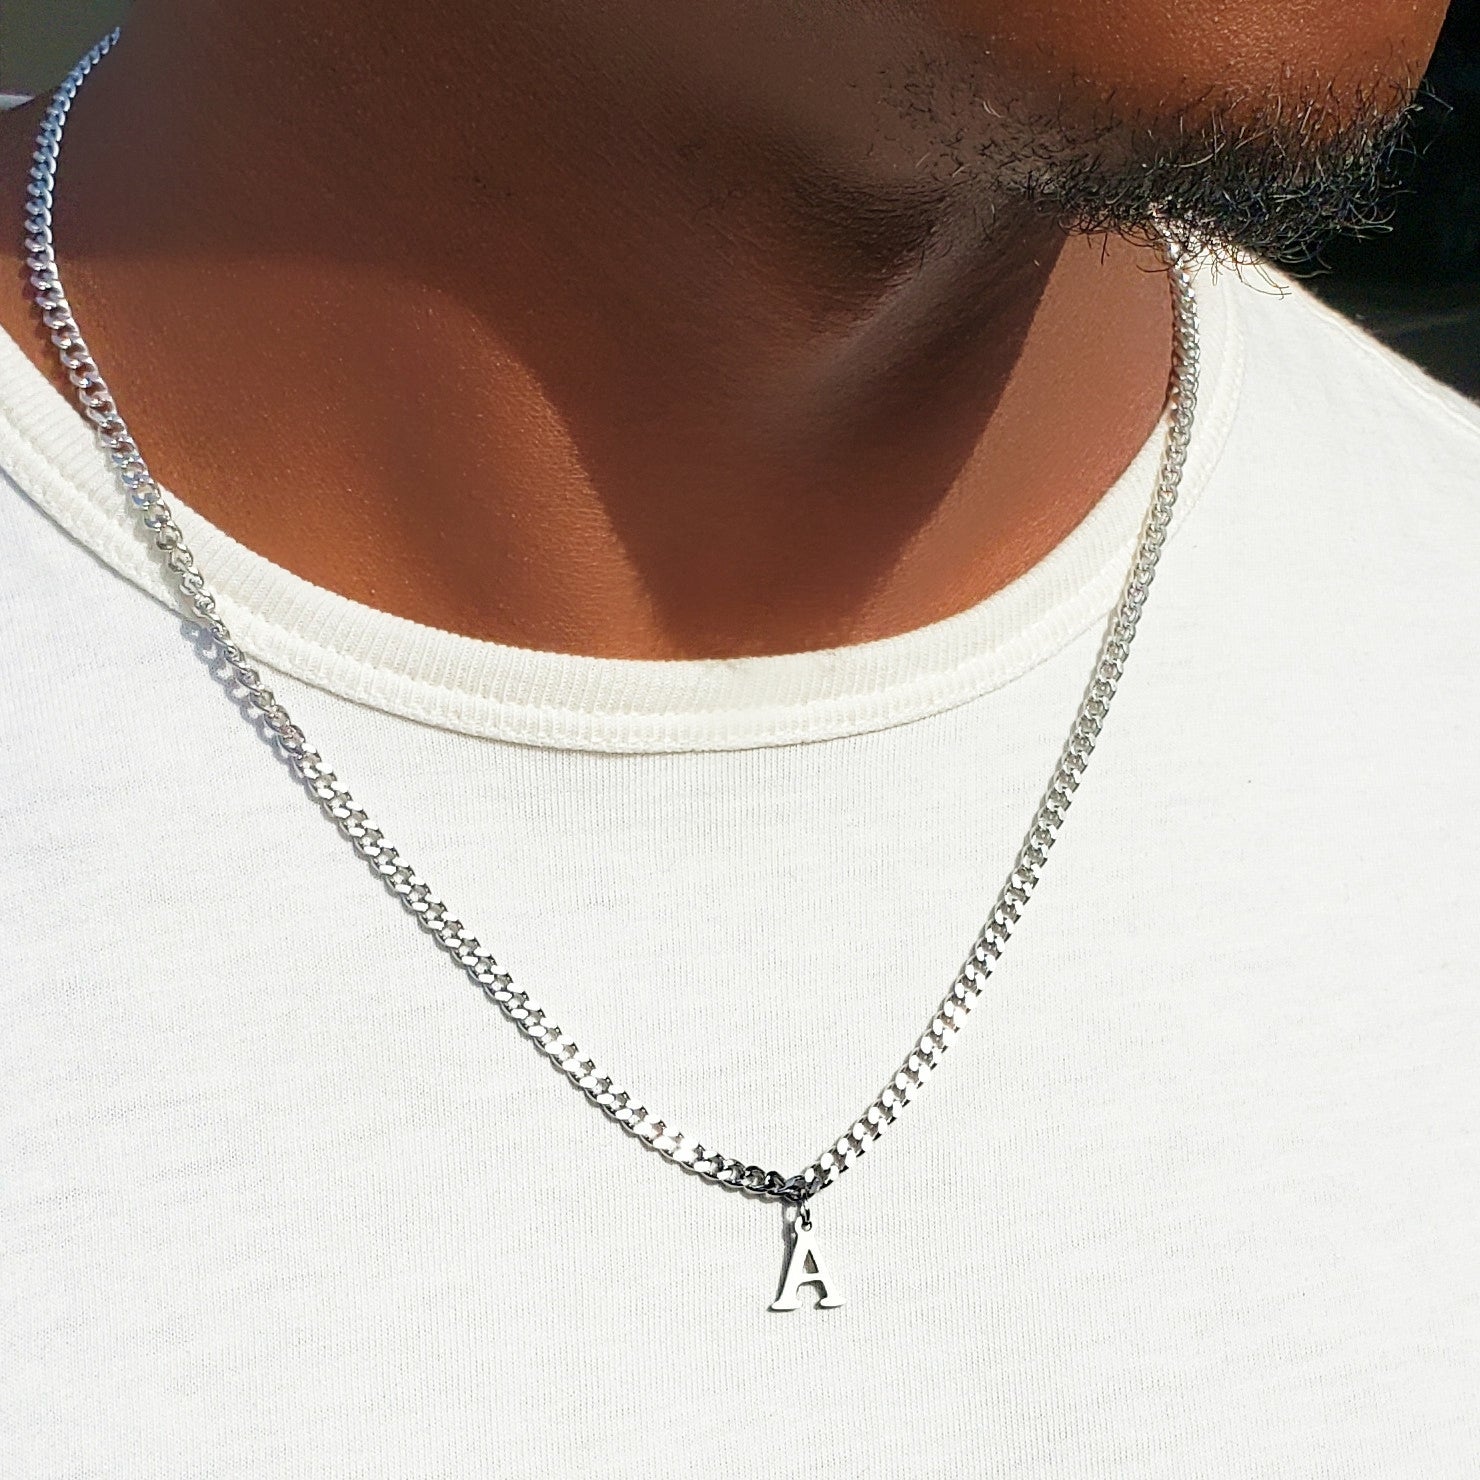 Cupike Custom Picture Necklace Personalized - Customized Photo Pendant  Necklaces, Hip Hop Chain with Pictures Personalized Gift for Dad Men Women  (01-Heart Photo) | Amazon.com